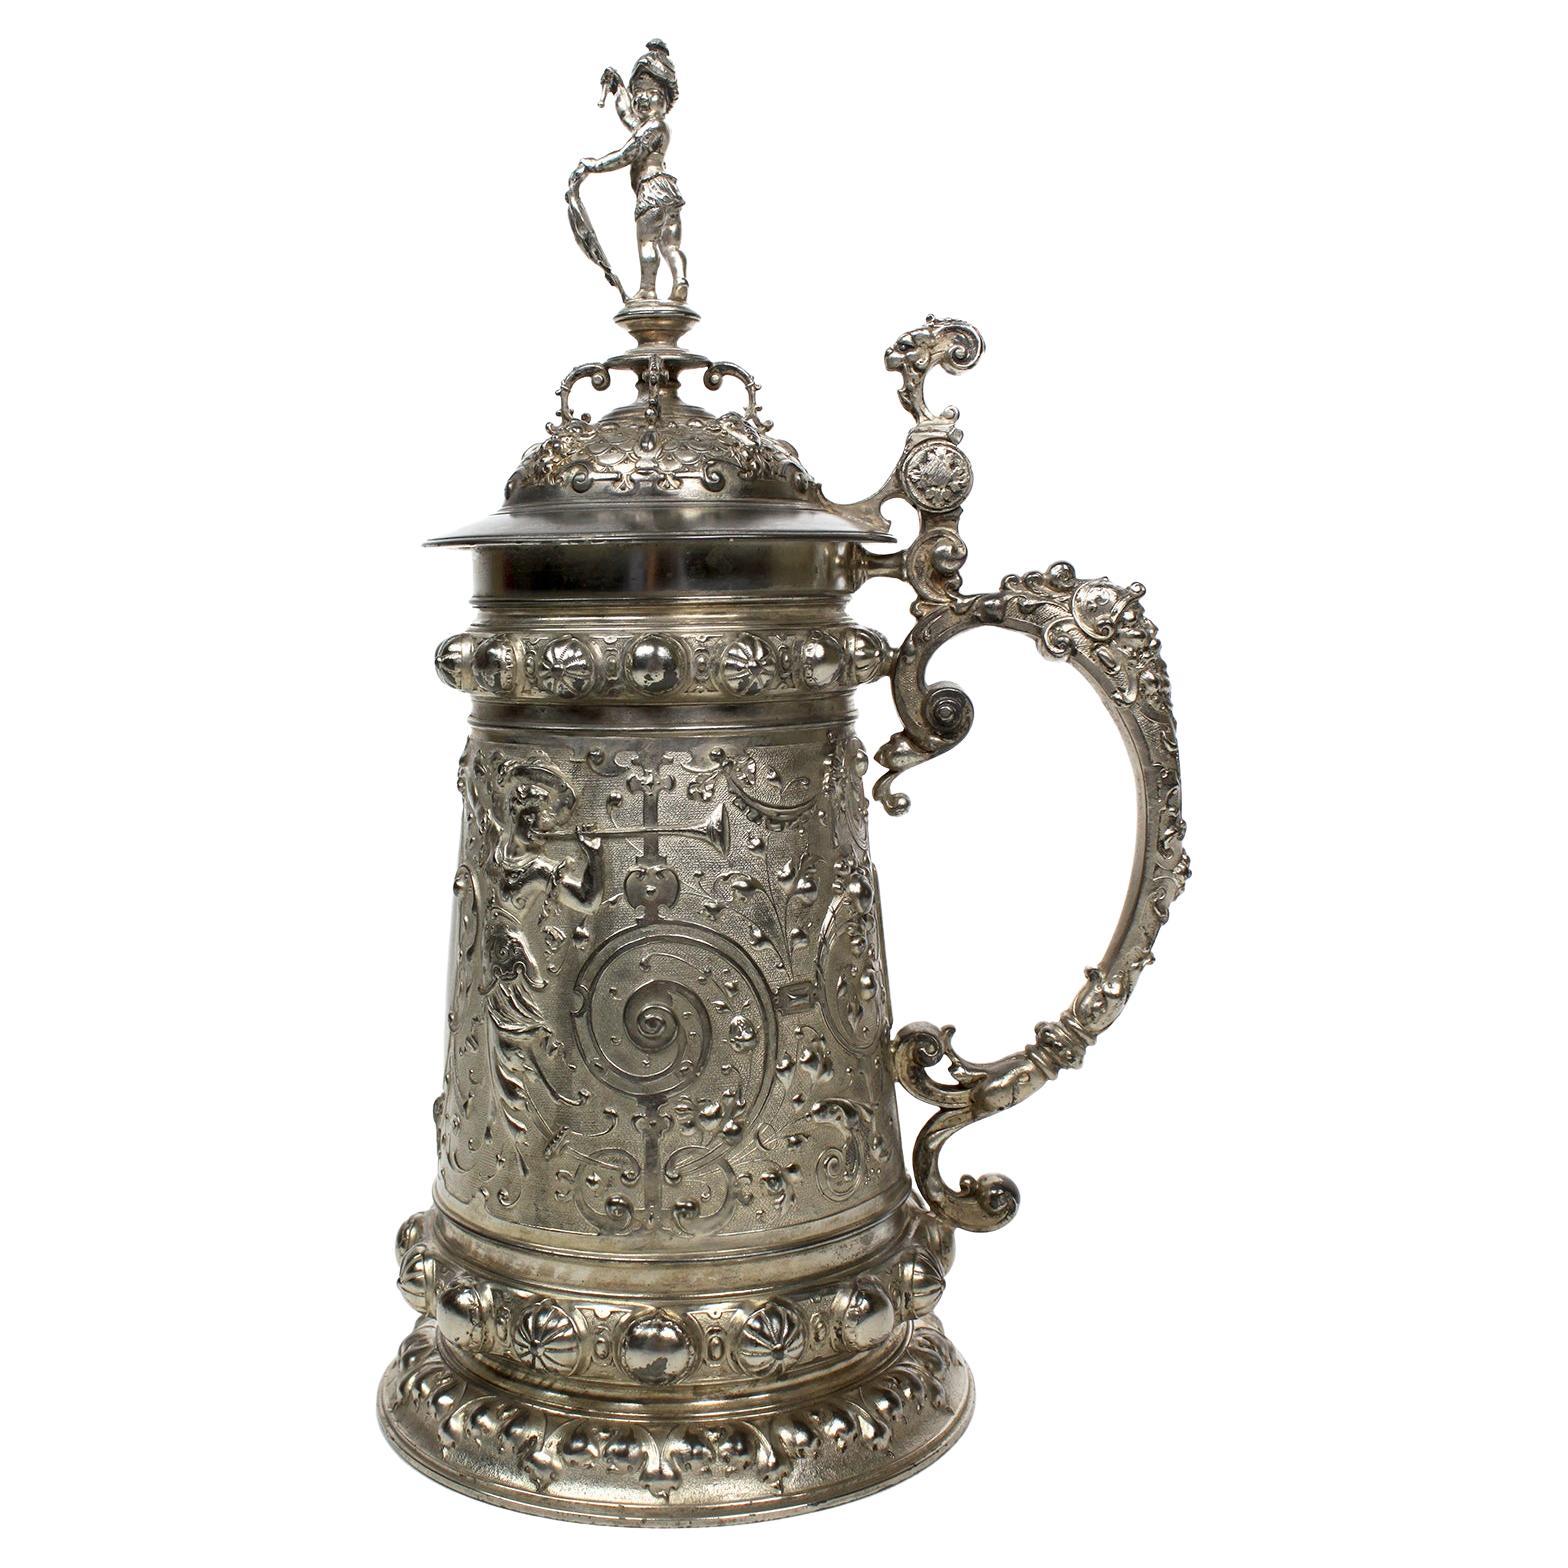 19th Century Renaissance Revival Style Britannia Silver Plated WMF Beer-Tankard For Sale